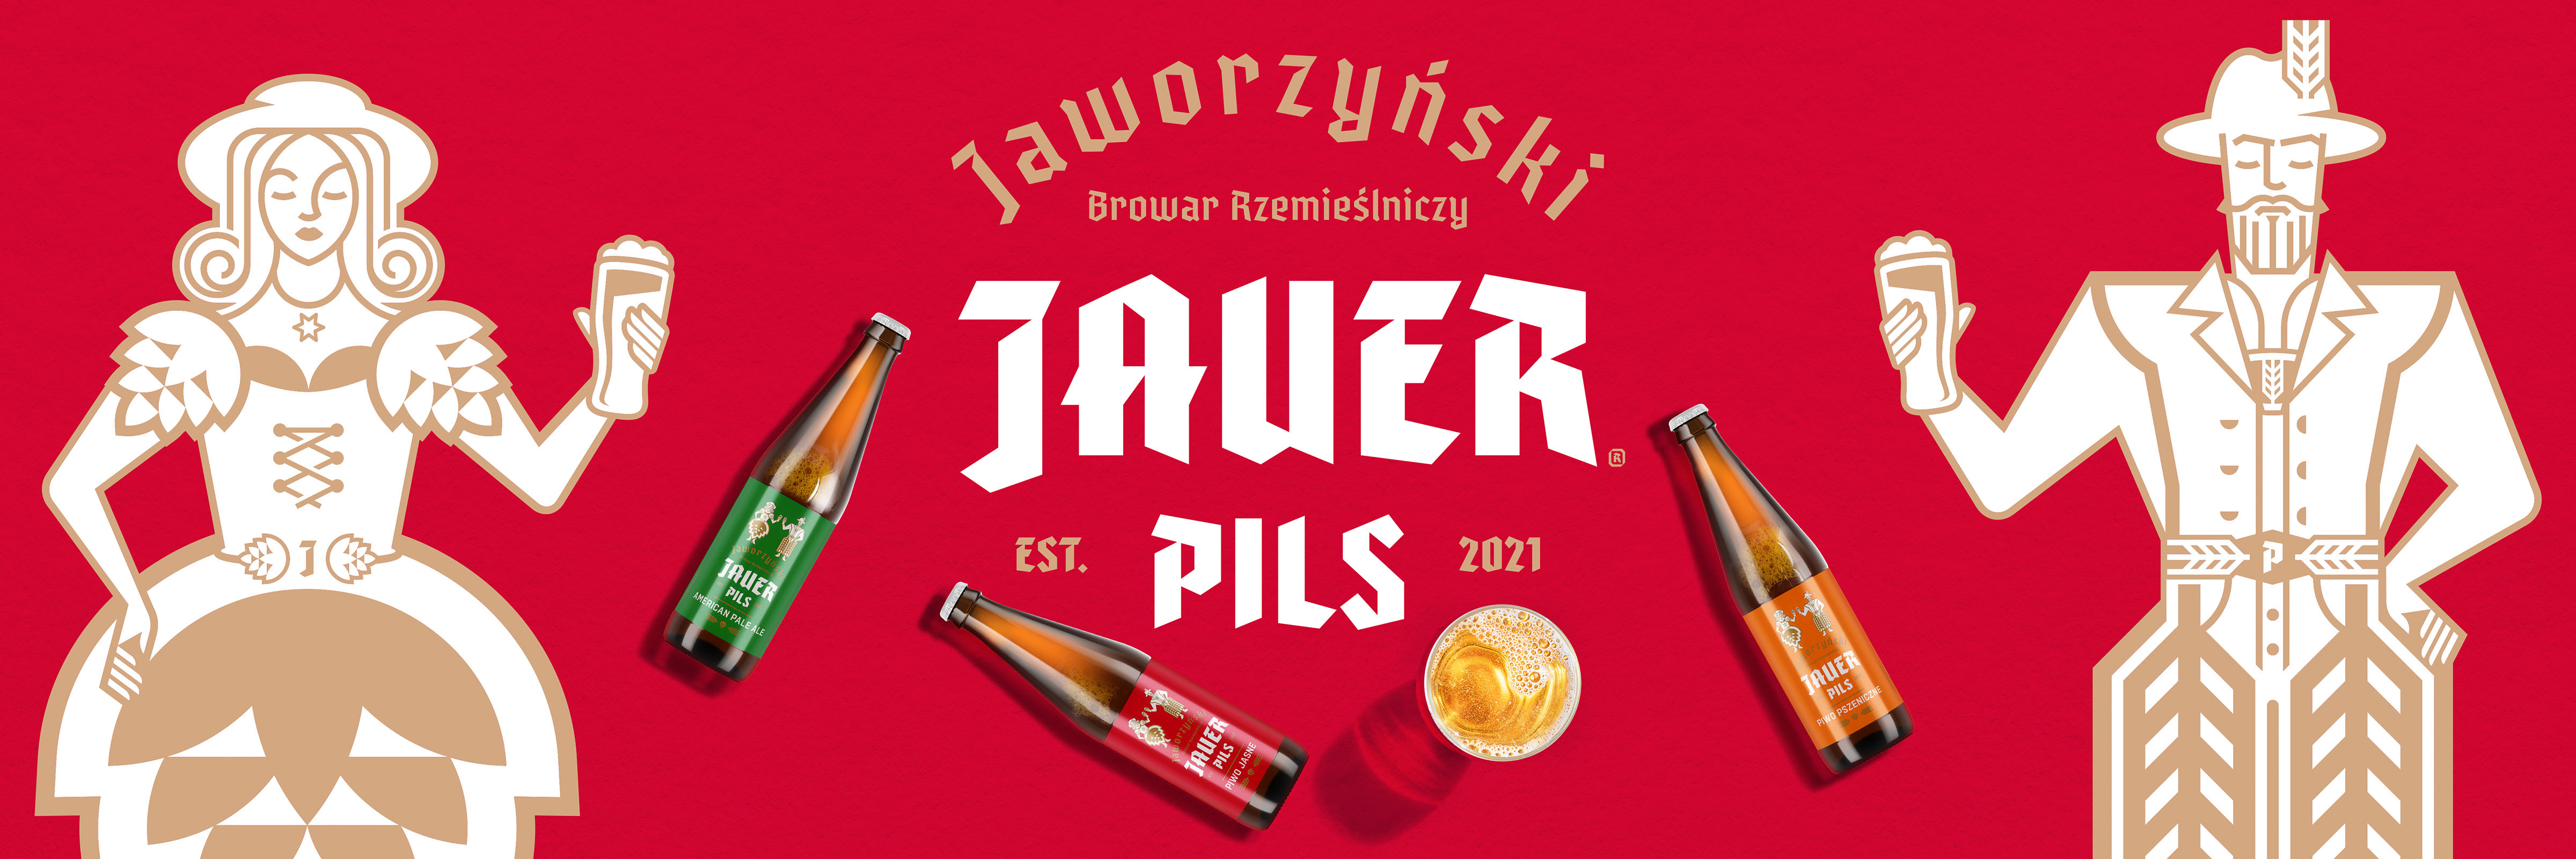 Sparrow Design Creates Packaging Design and Visual Identity for Jauer Craft Brewary